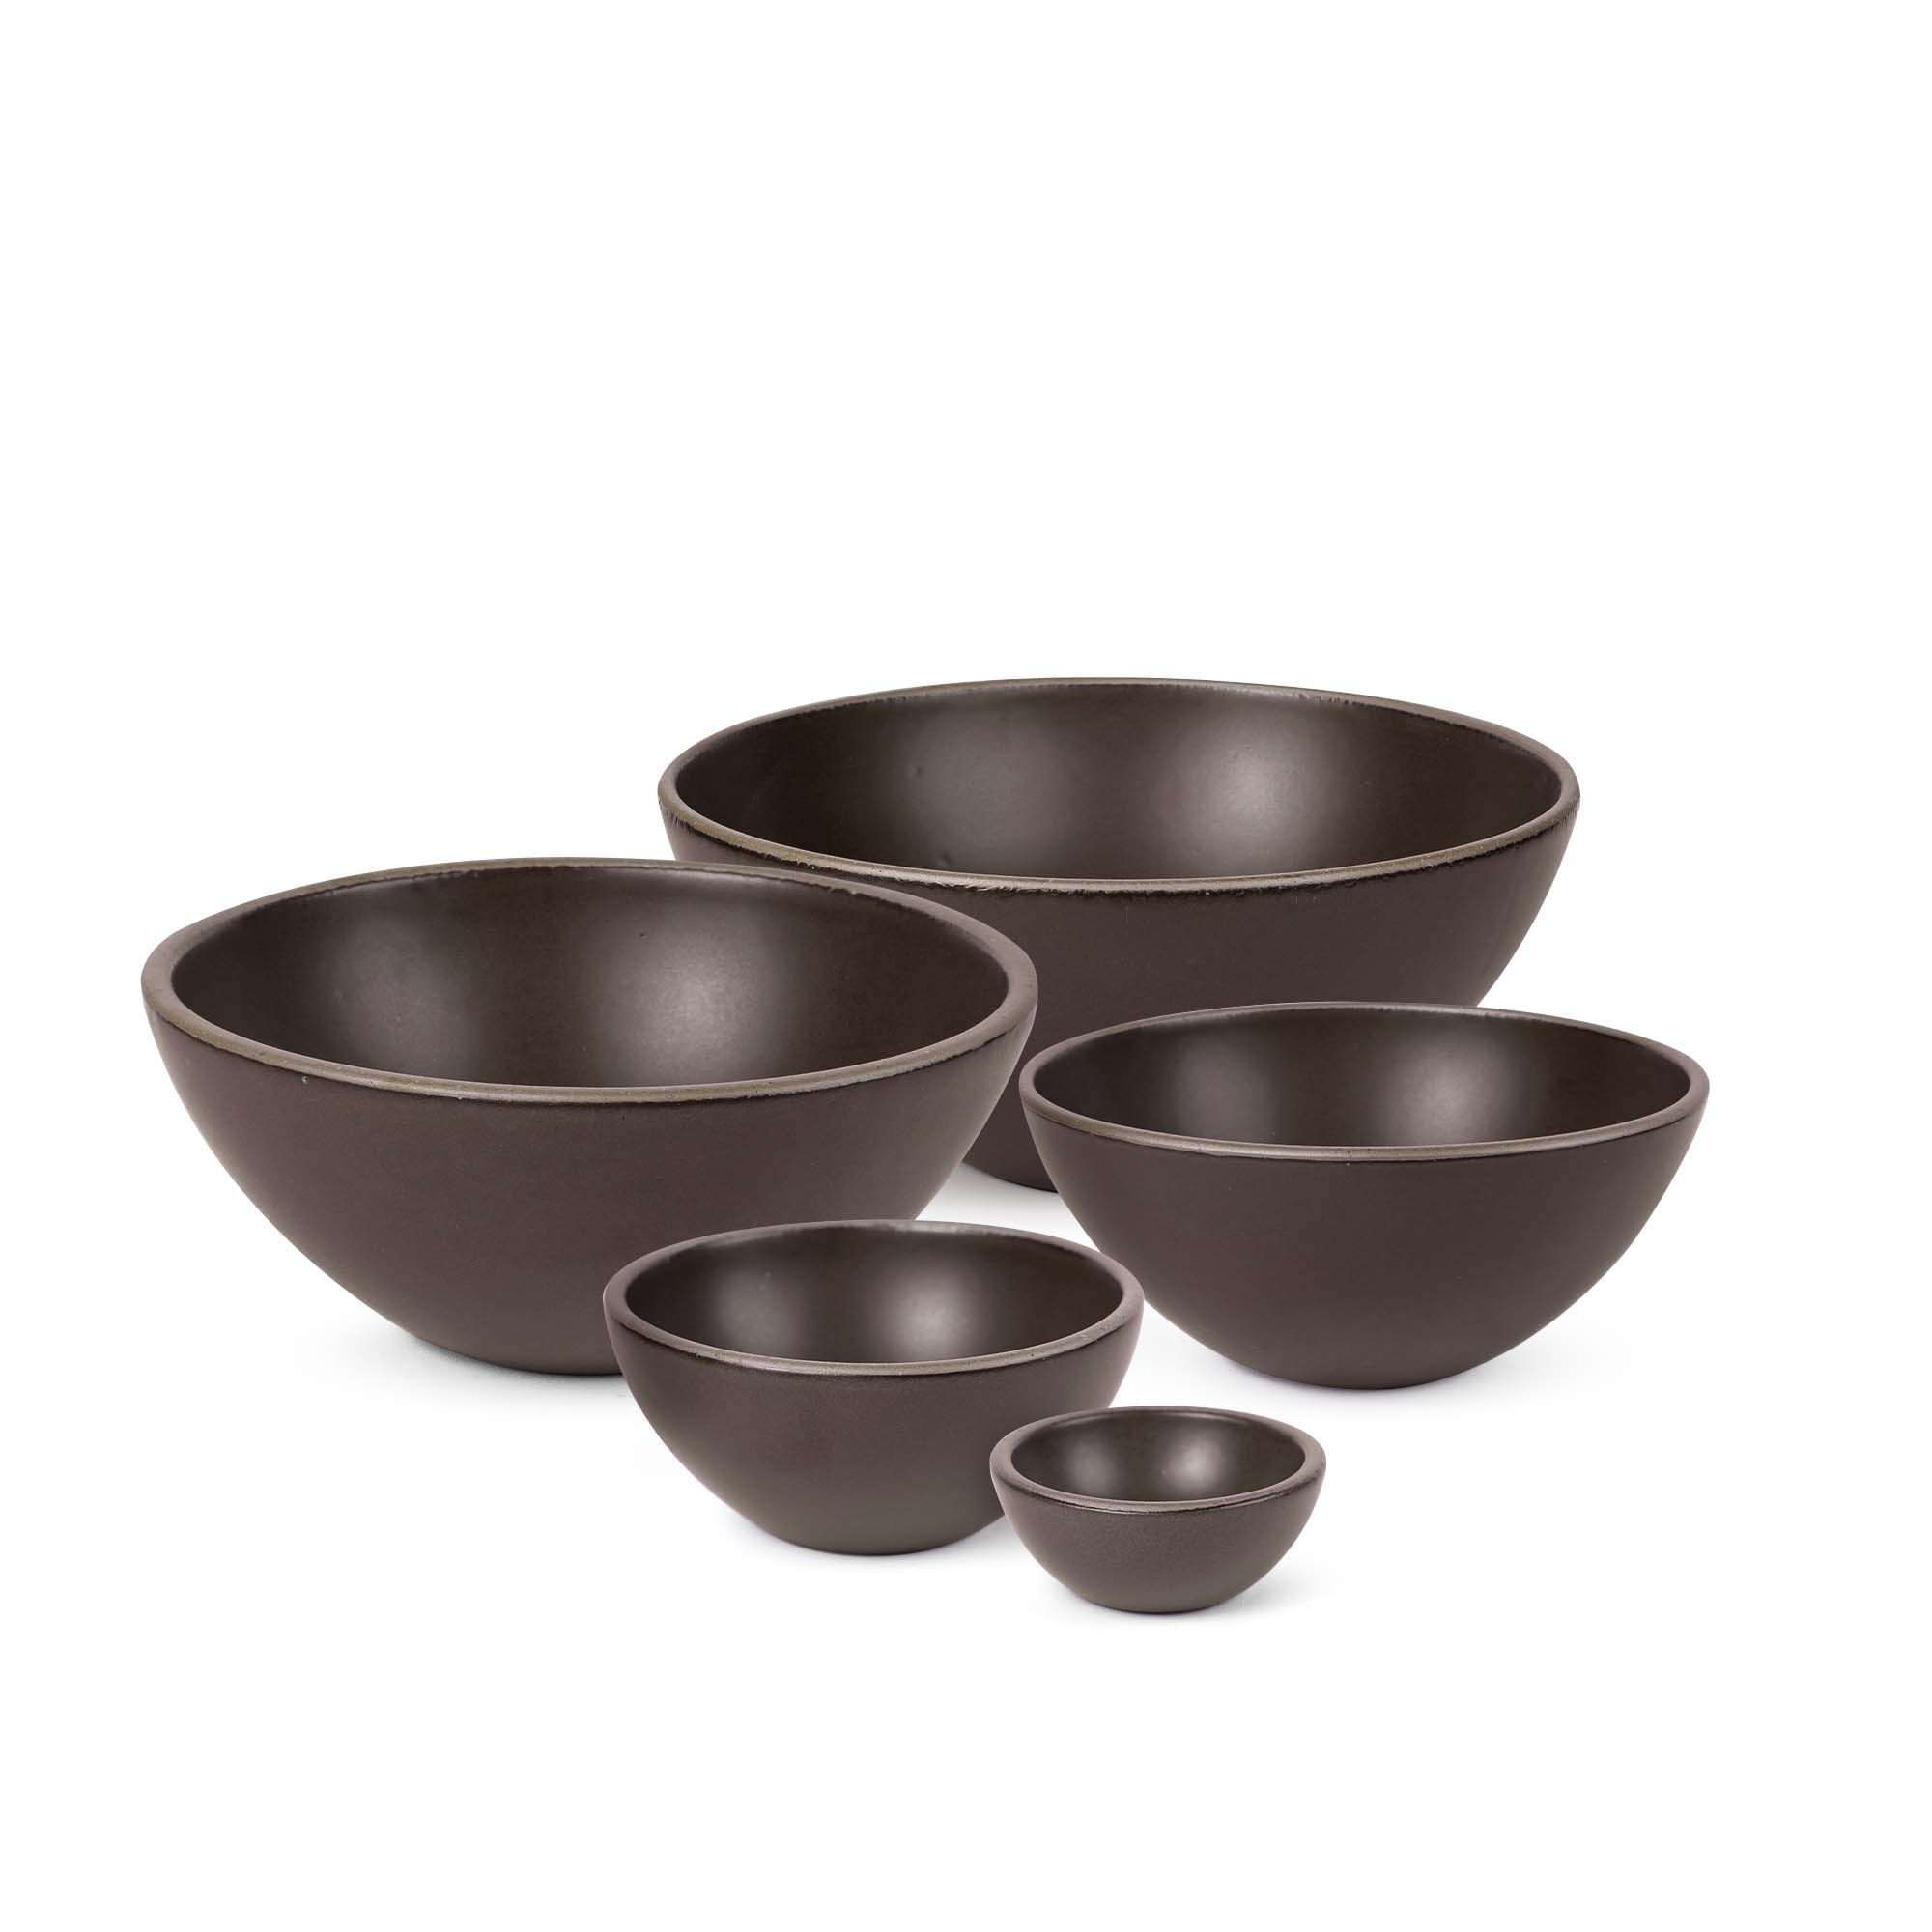 A bitty bowl, ice cream bowl, soup bowl, popcorn bowl, and mixing bowl paired together in a dark cool brown color featuring iron speckles